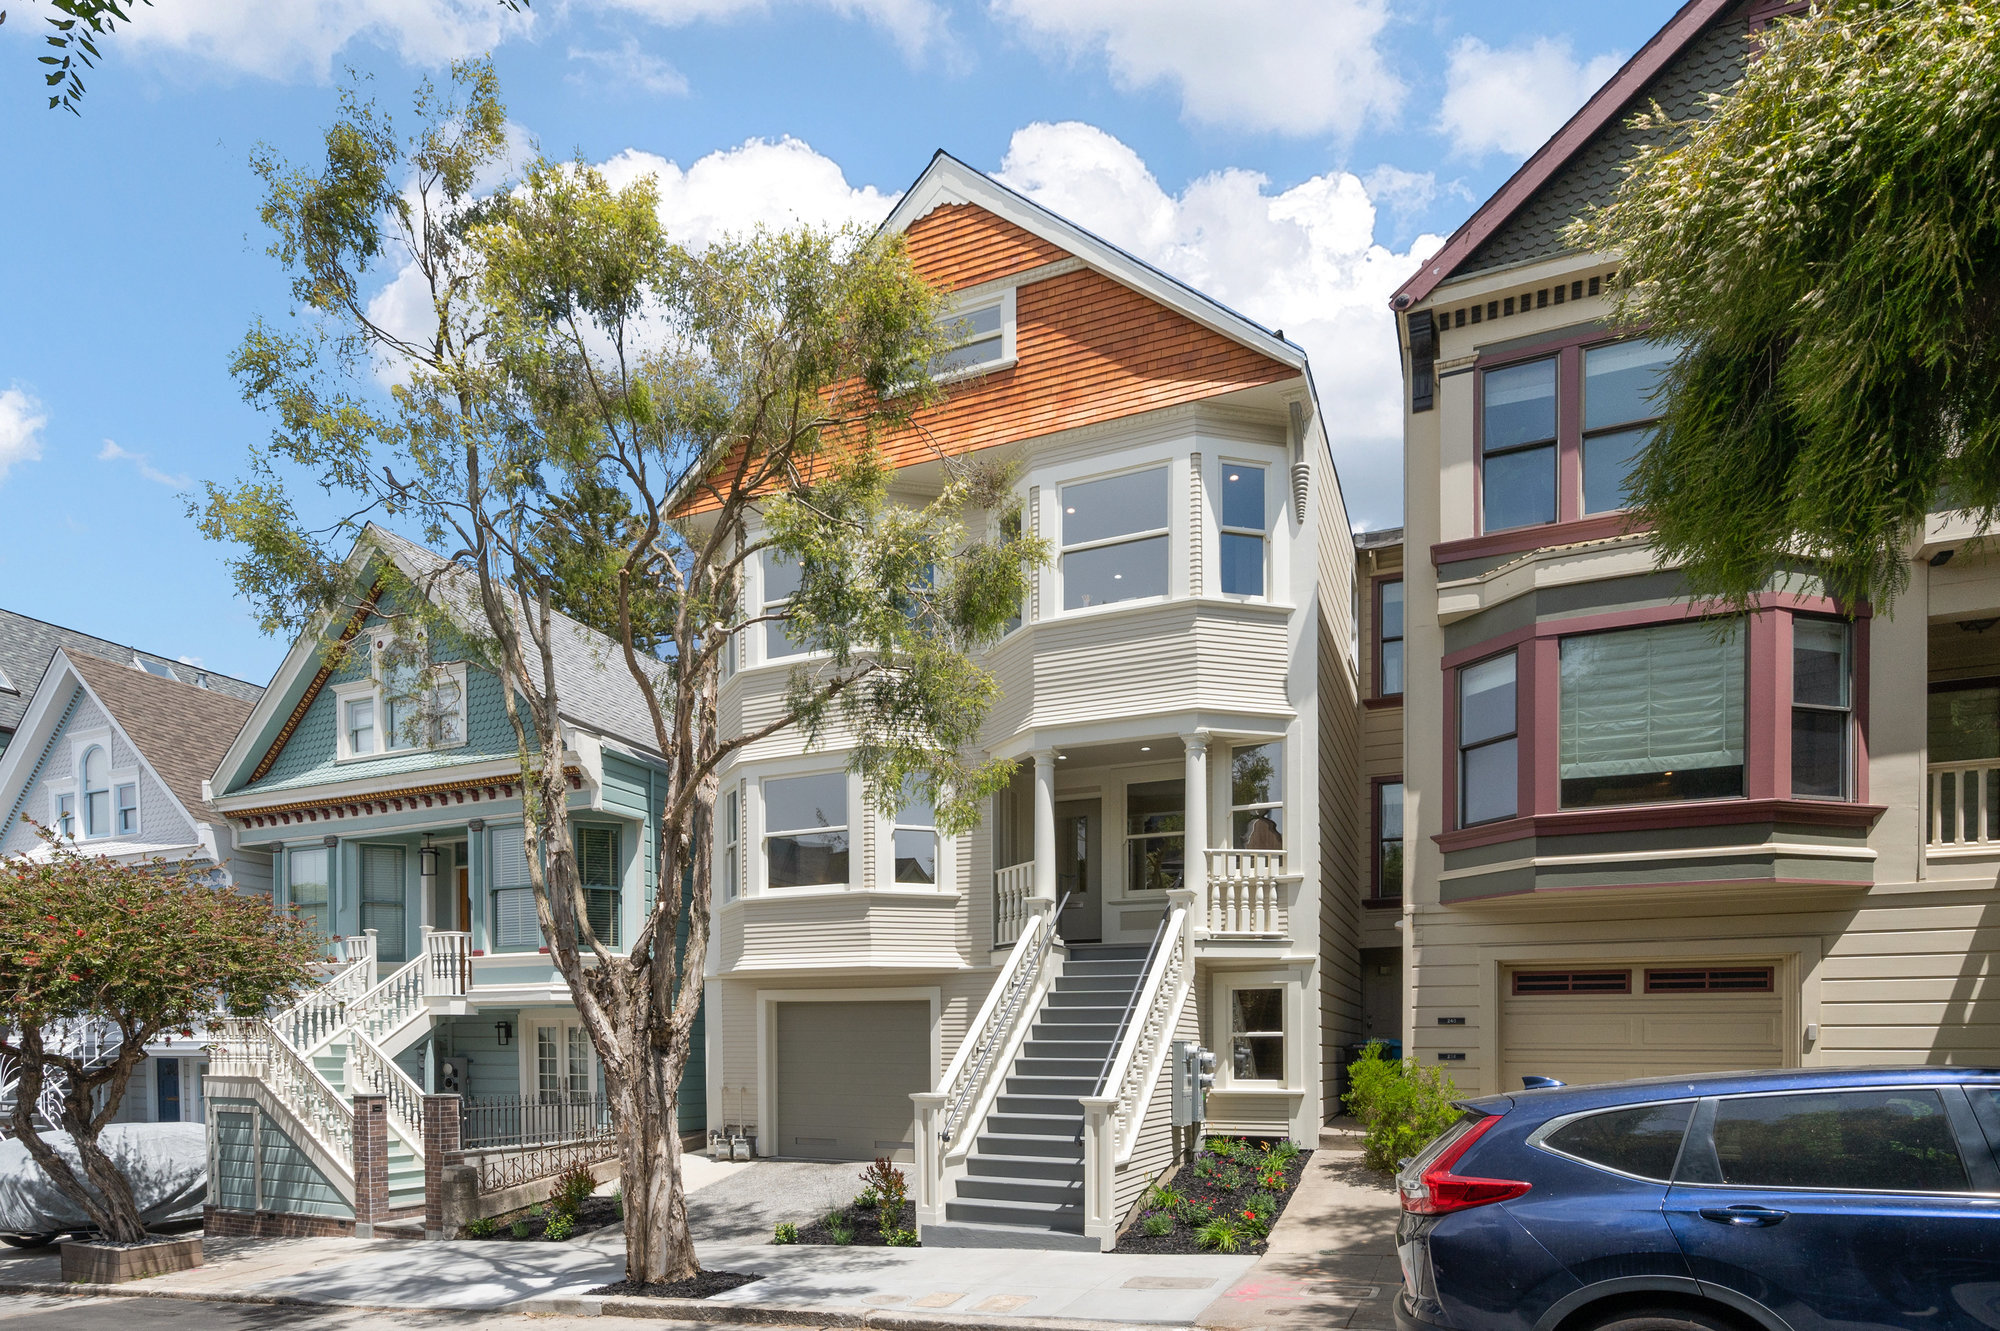 Property Photo: Street view of 232 Downey Street in Cole Valley, for sale by John DiDomenico